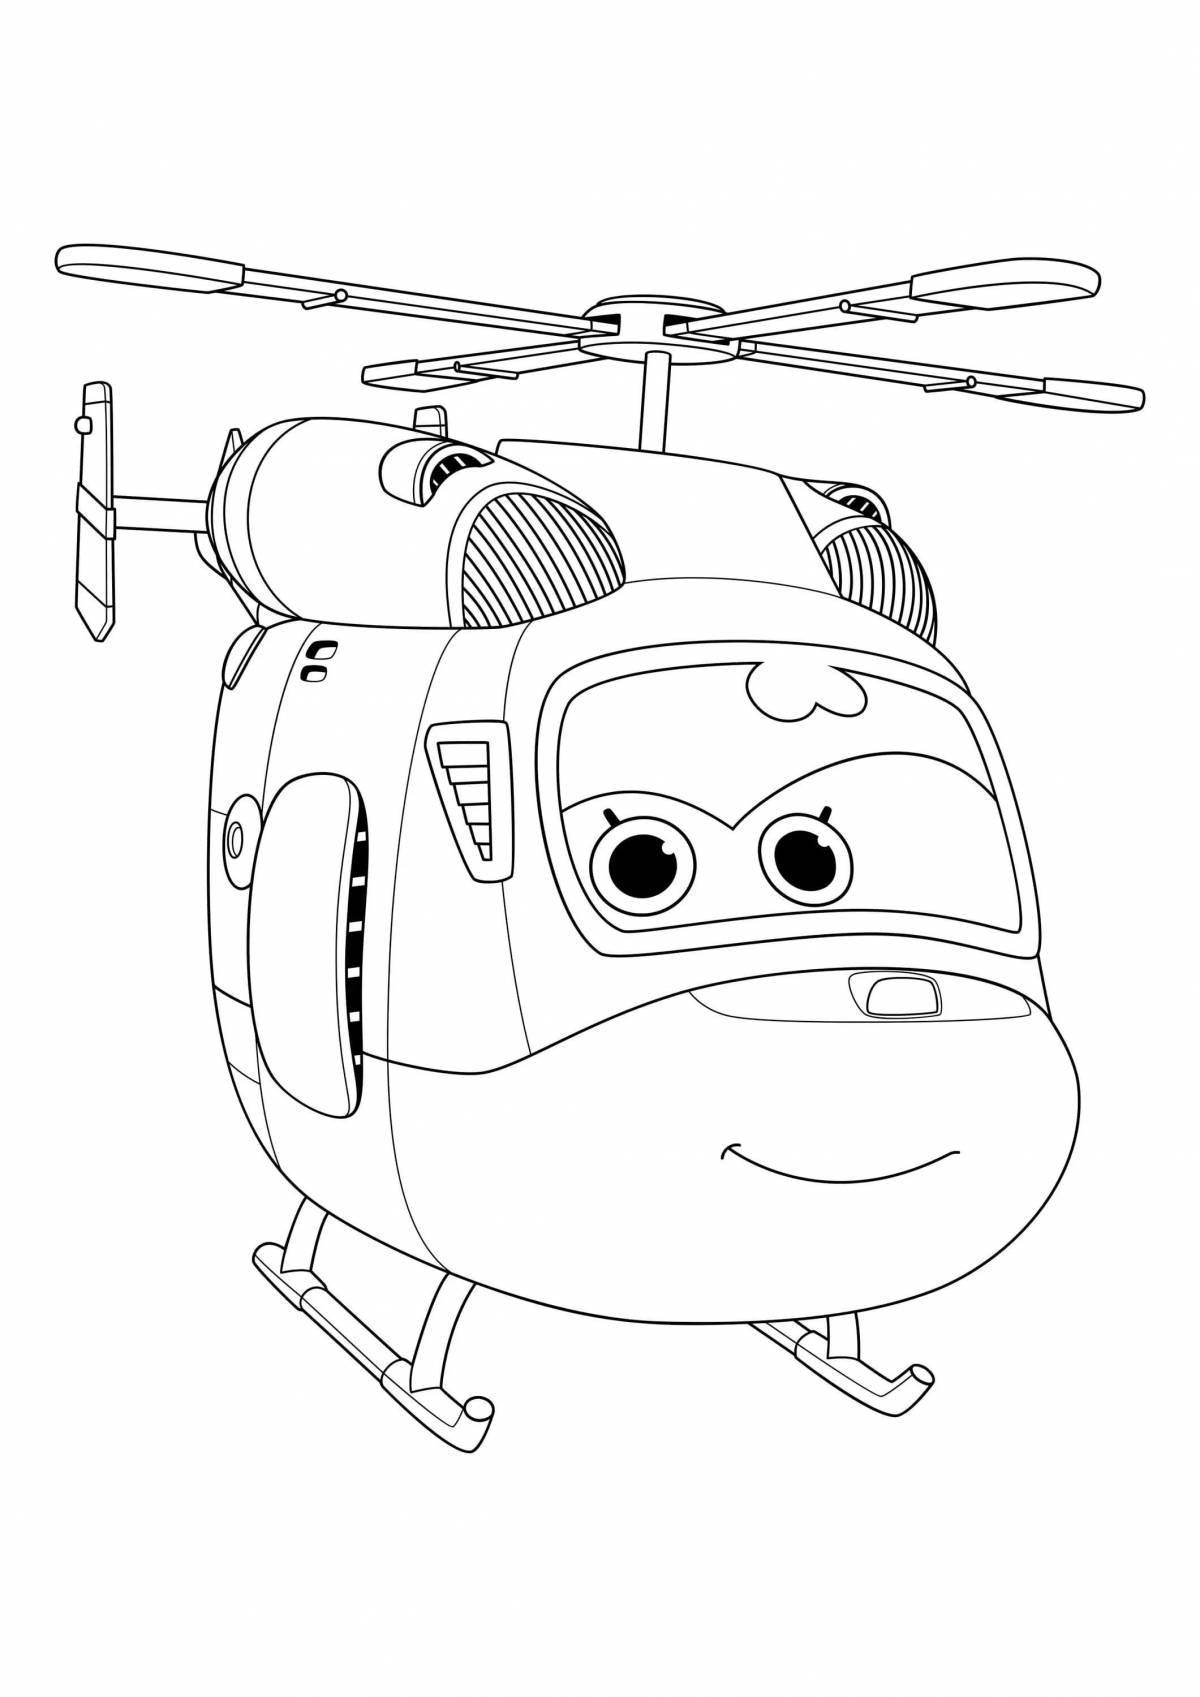 Coloring page playful dizzy super wings